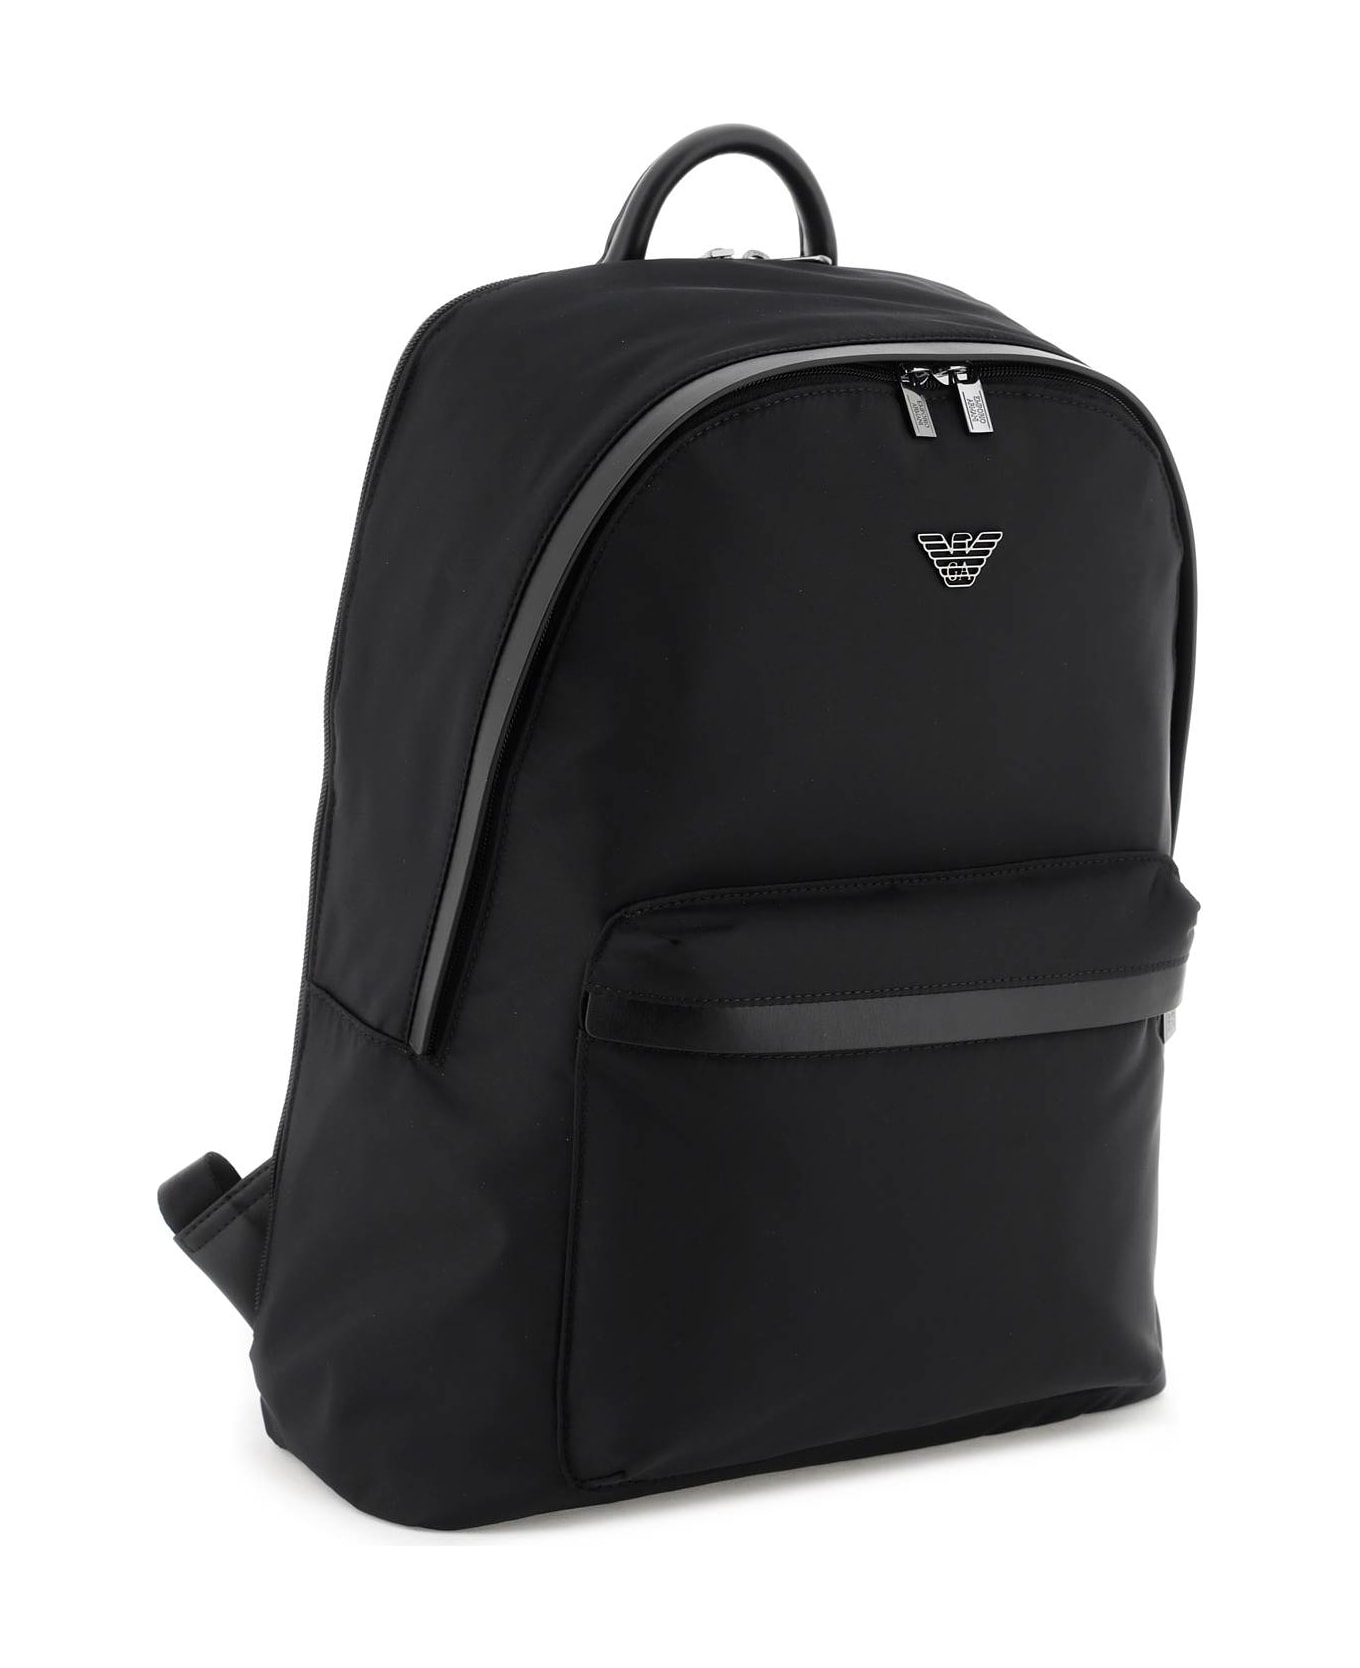 Emporio Armani Recycled Nylon Backpack - Black バックパック